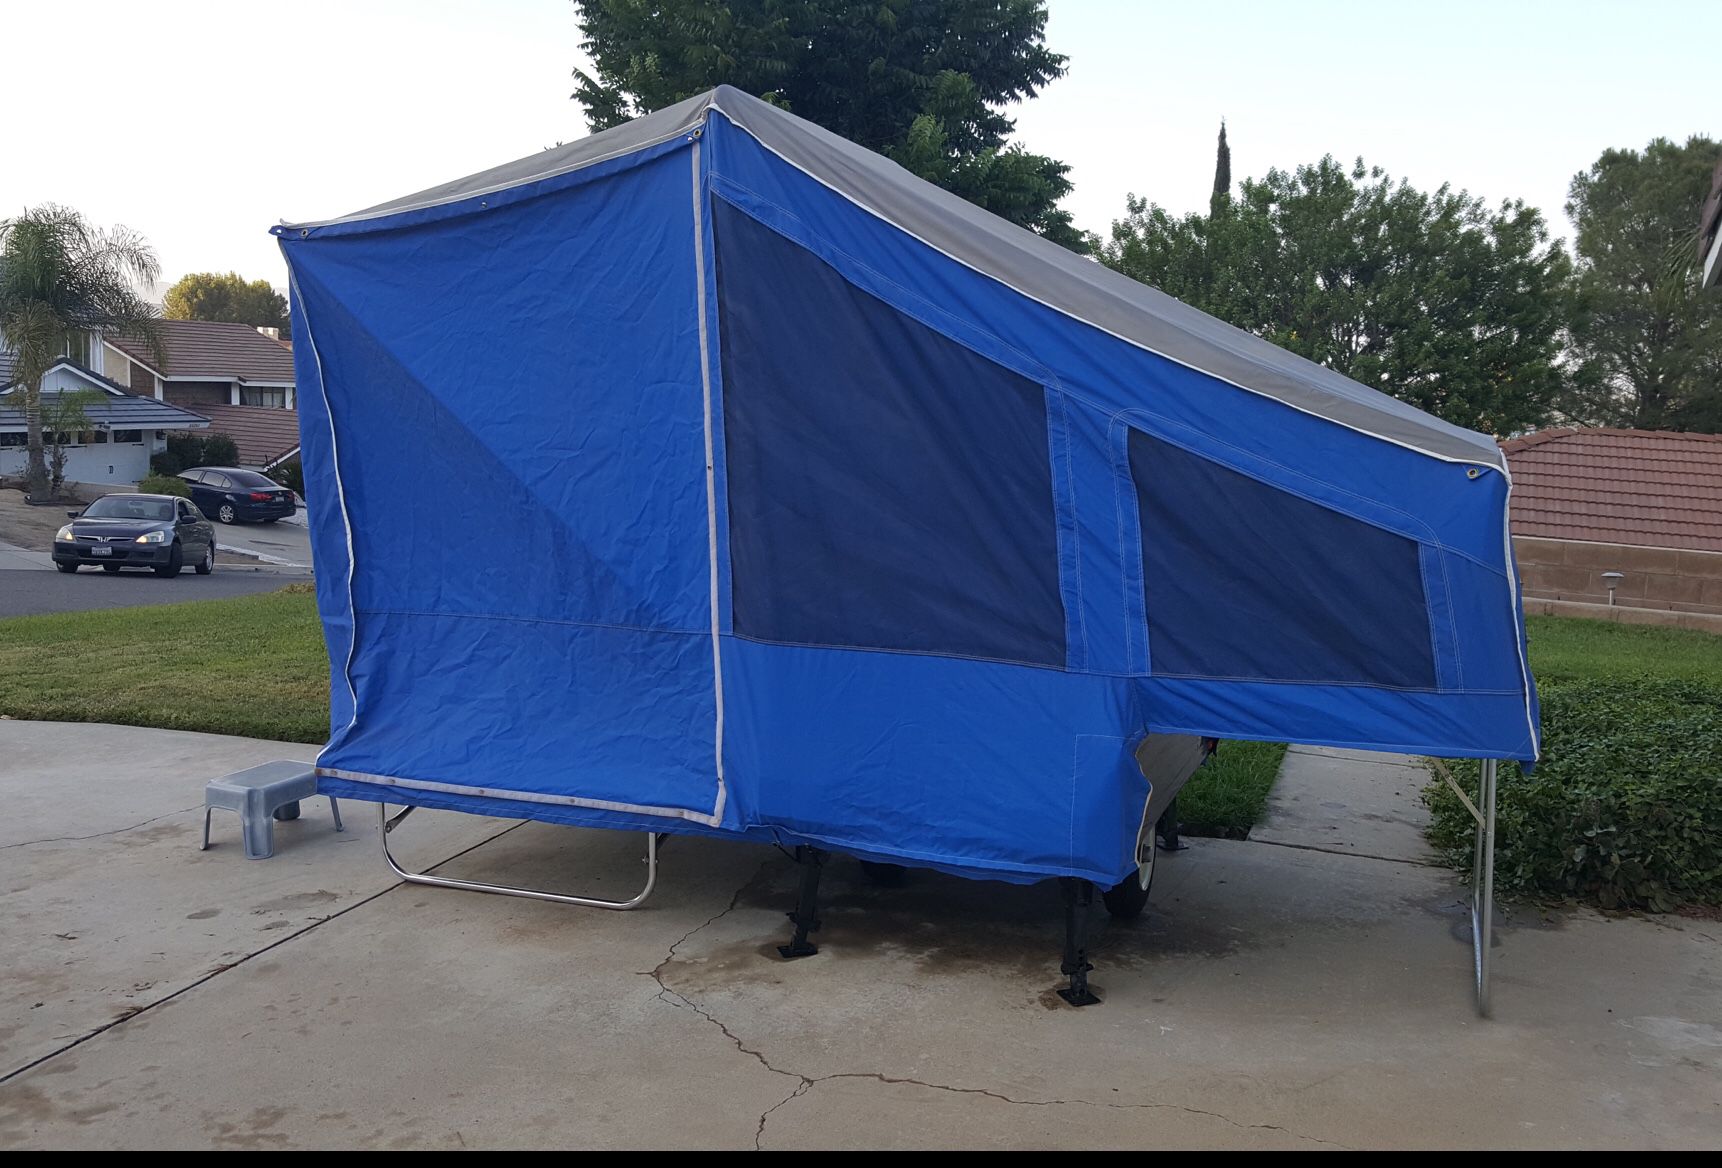 2011 Easy Camper Tent Trailer By Time Out